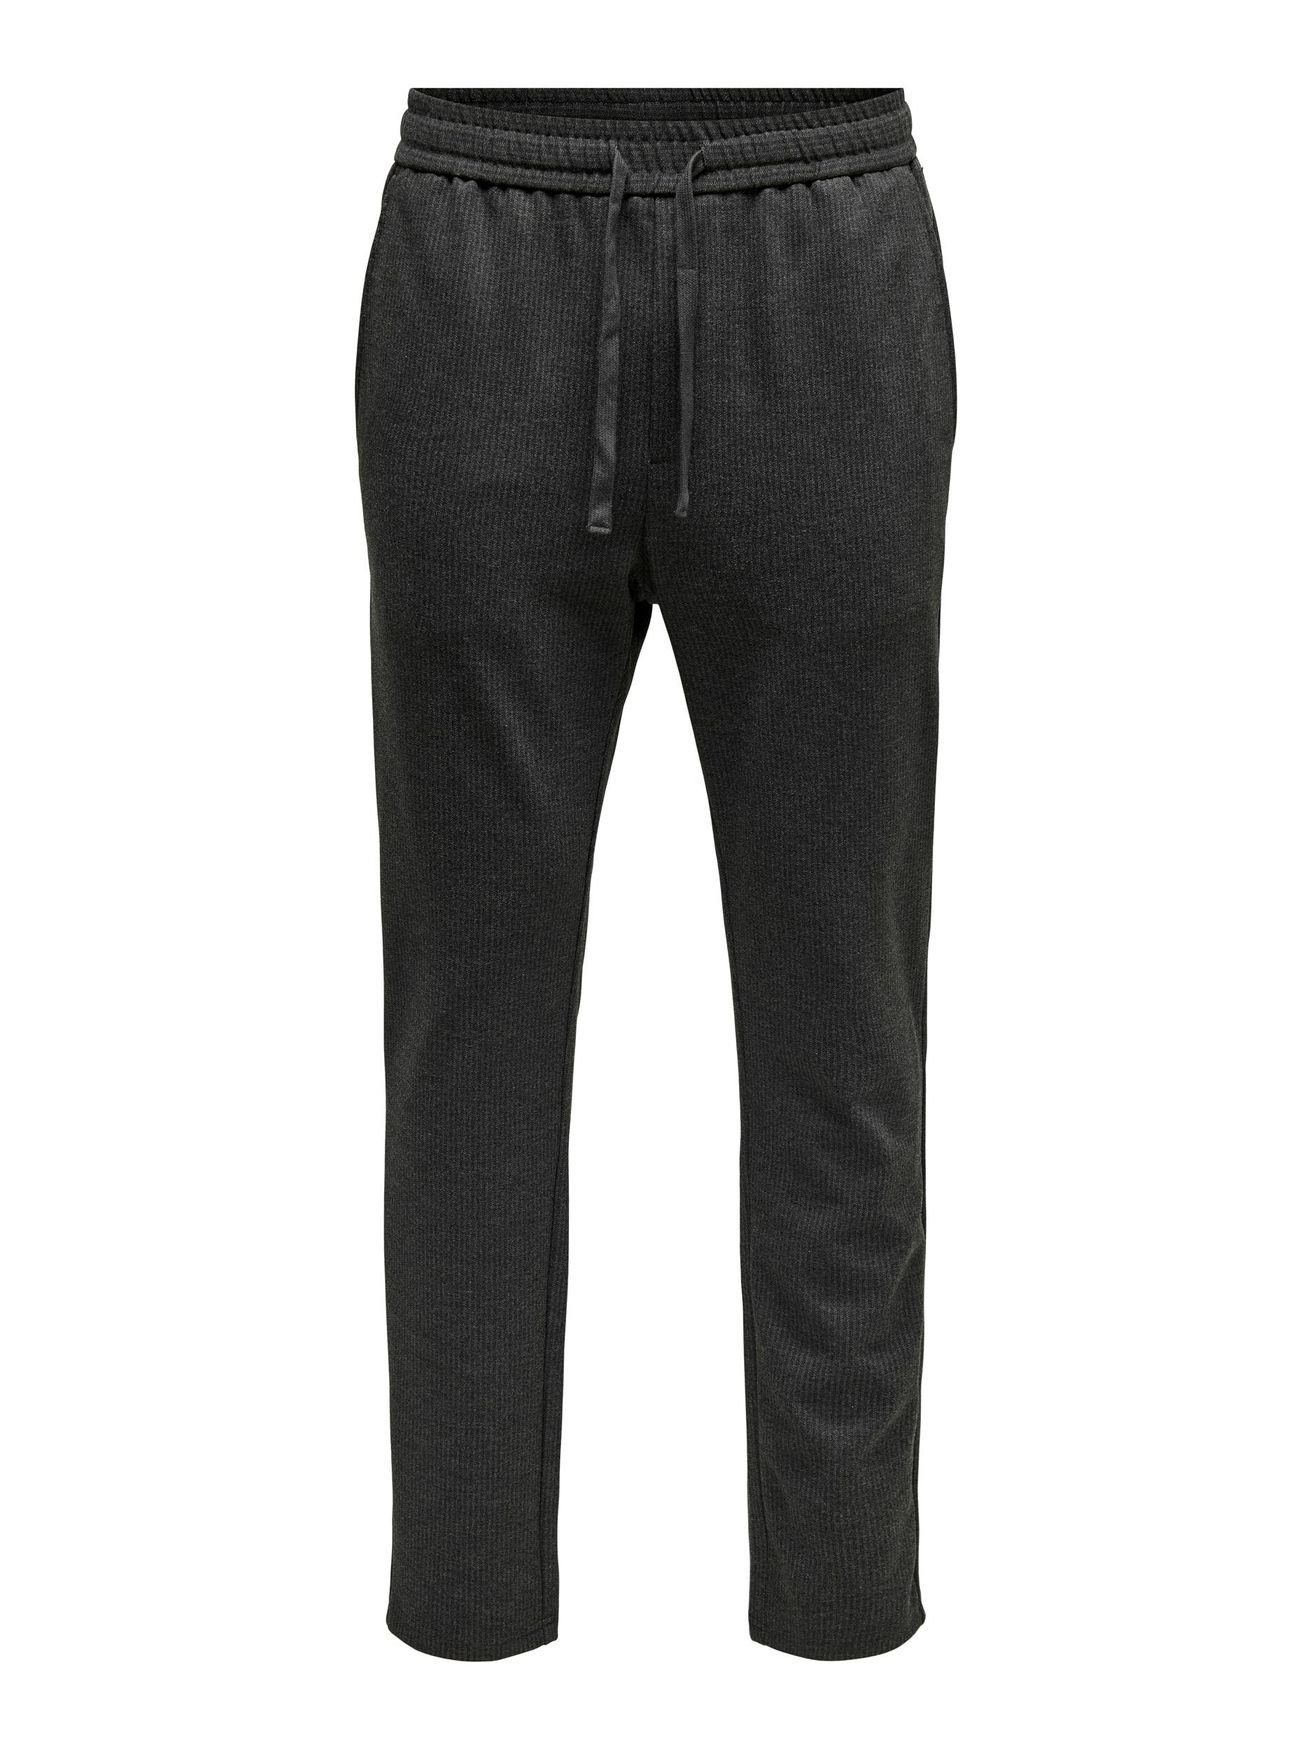 ONLY & SONS 4294 Ripped ONSLINUS Stoffhose Sommer Pants Freizeit Schwarz Stoffhose Relaxed in Bequeme